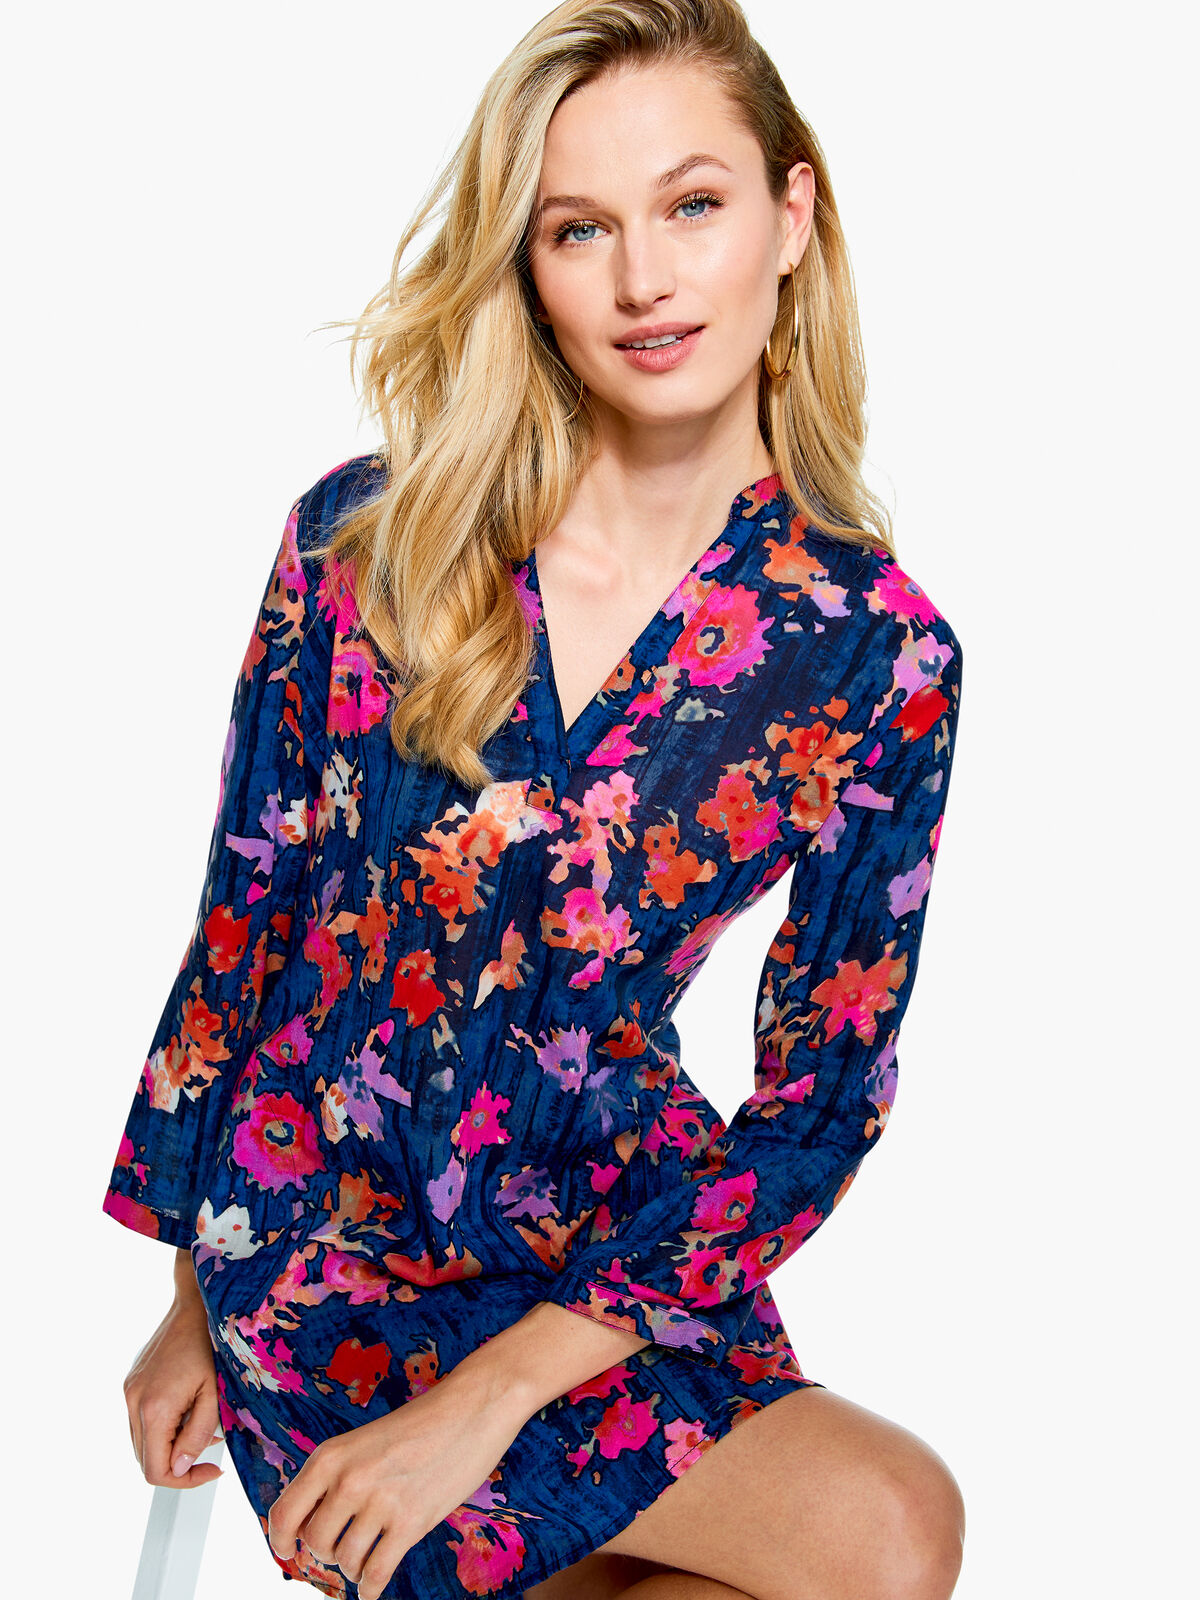 Glowing Blossoms Crinkle Tunic Dress